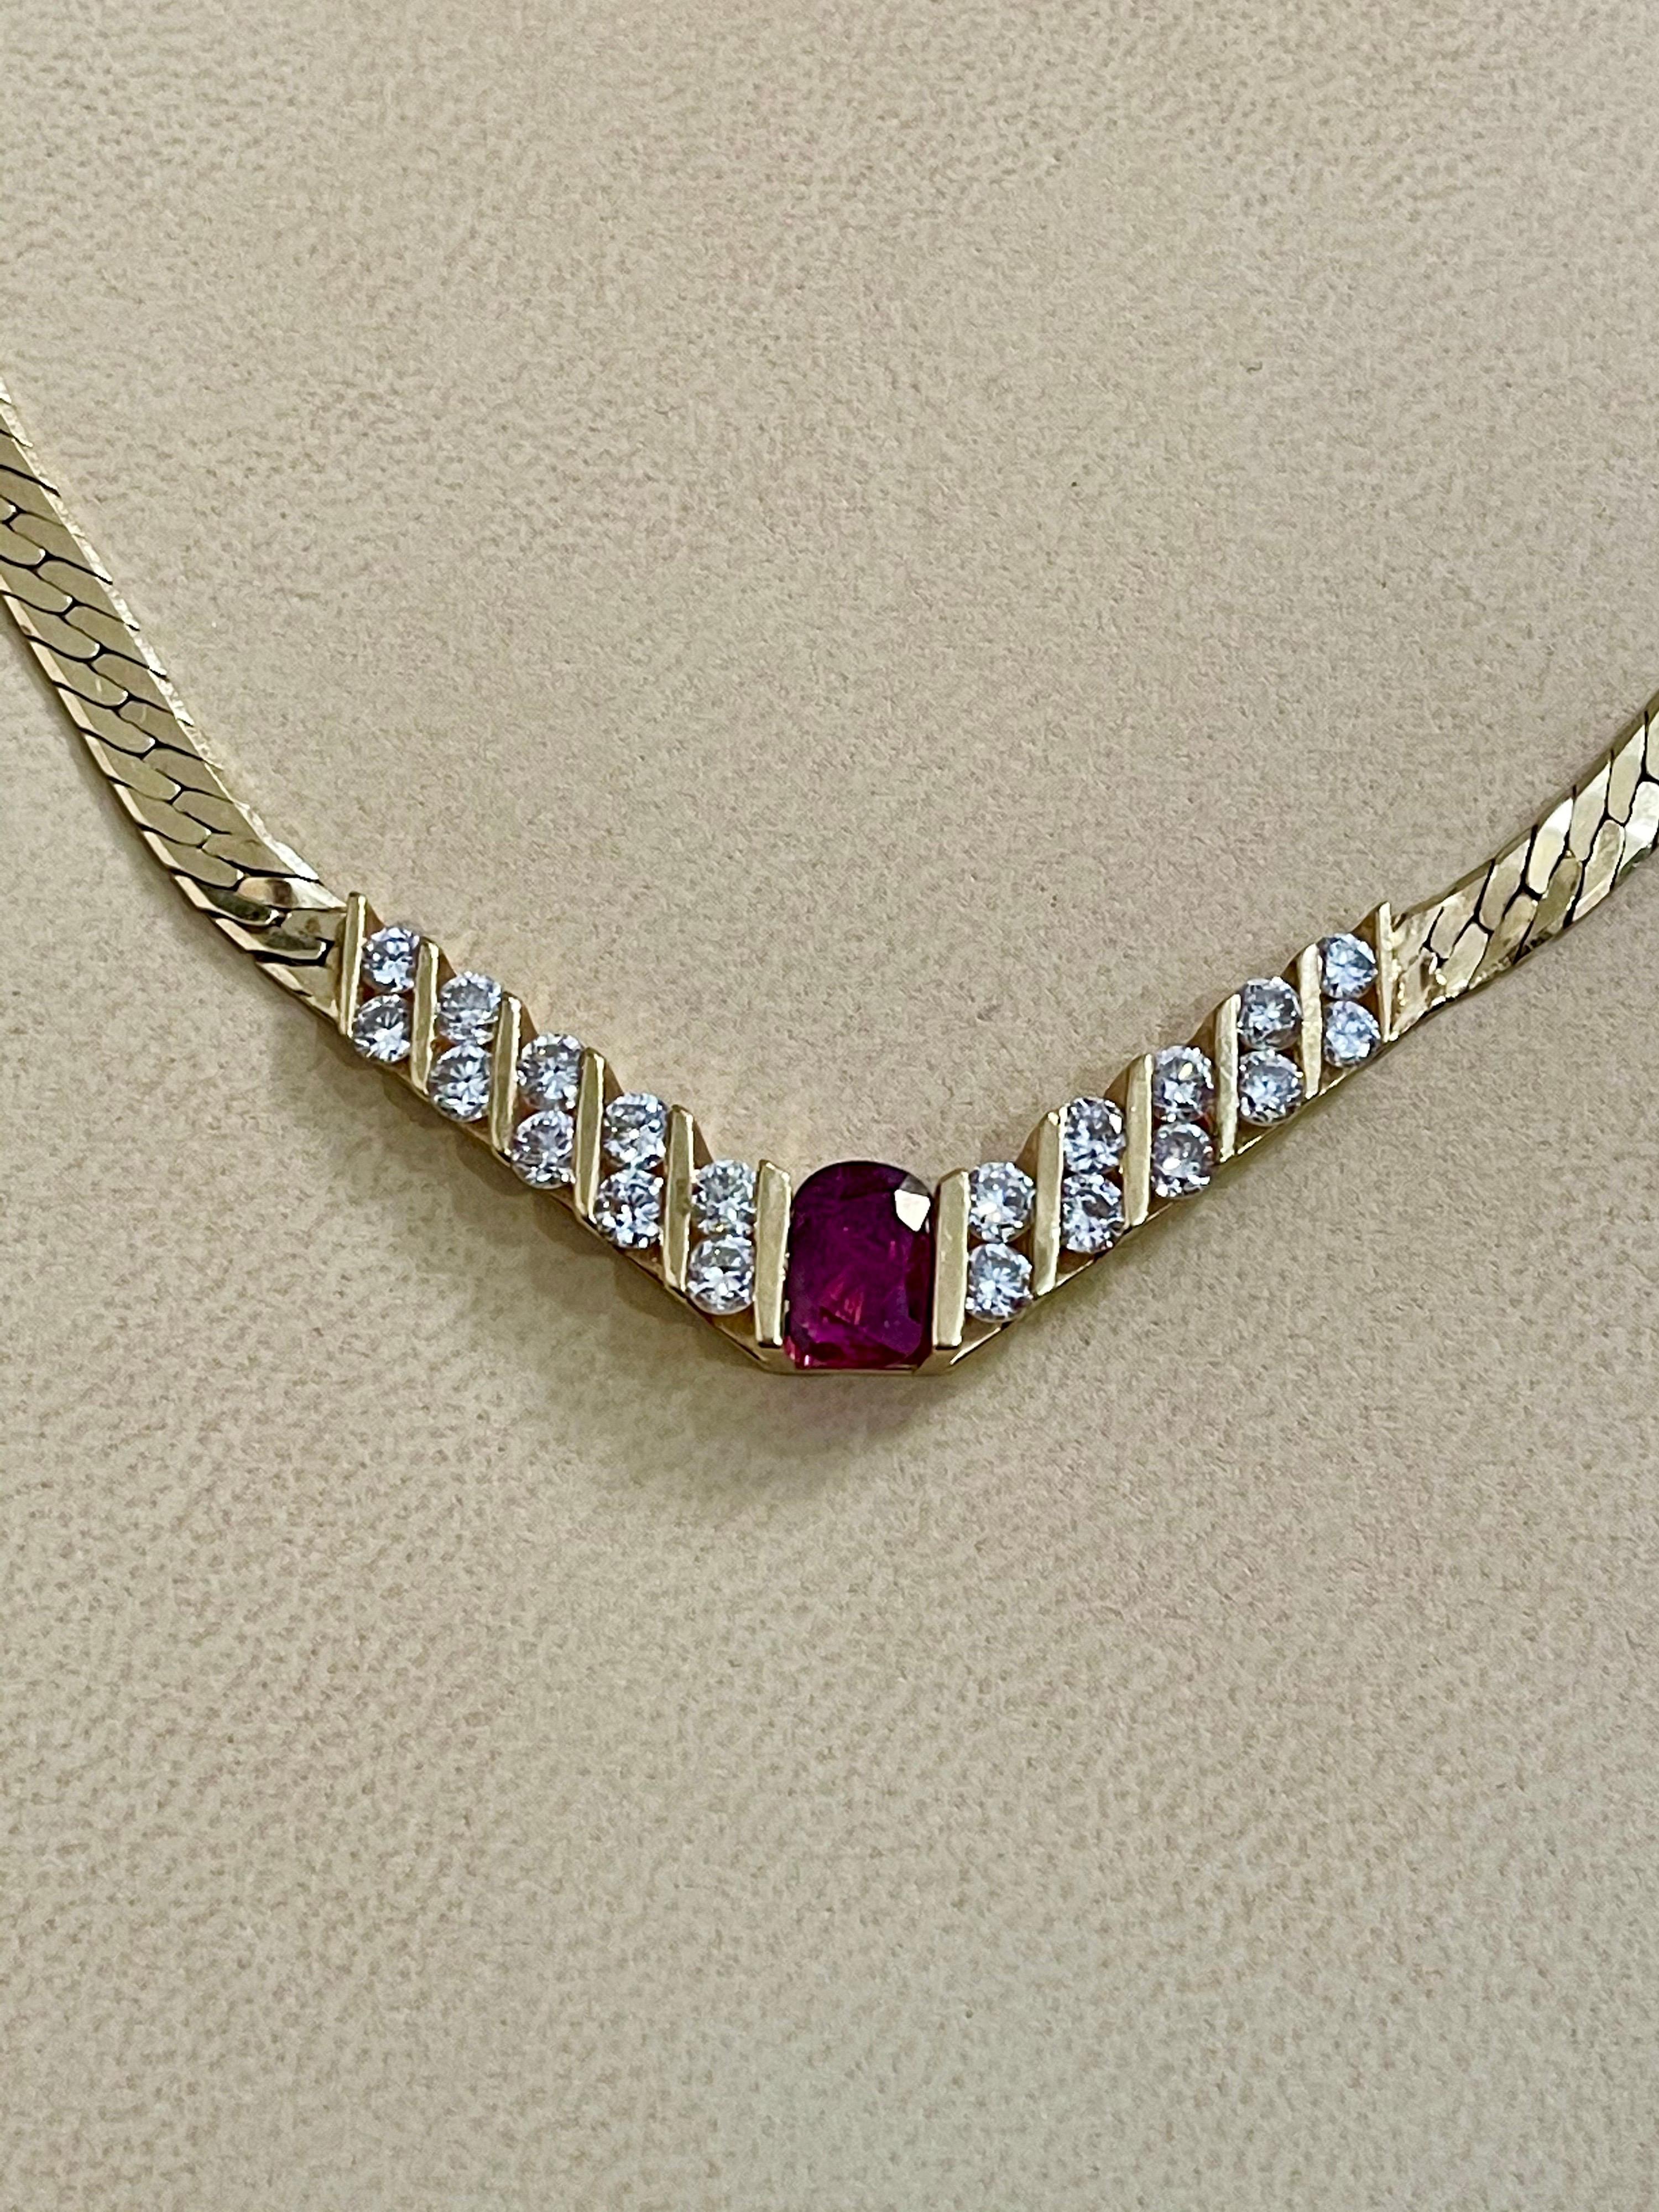 GIA Certified 3 Ct Natural Oval  Ruby & Diamond Pendant Necklace 14K Yellow Gold For Sale 2